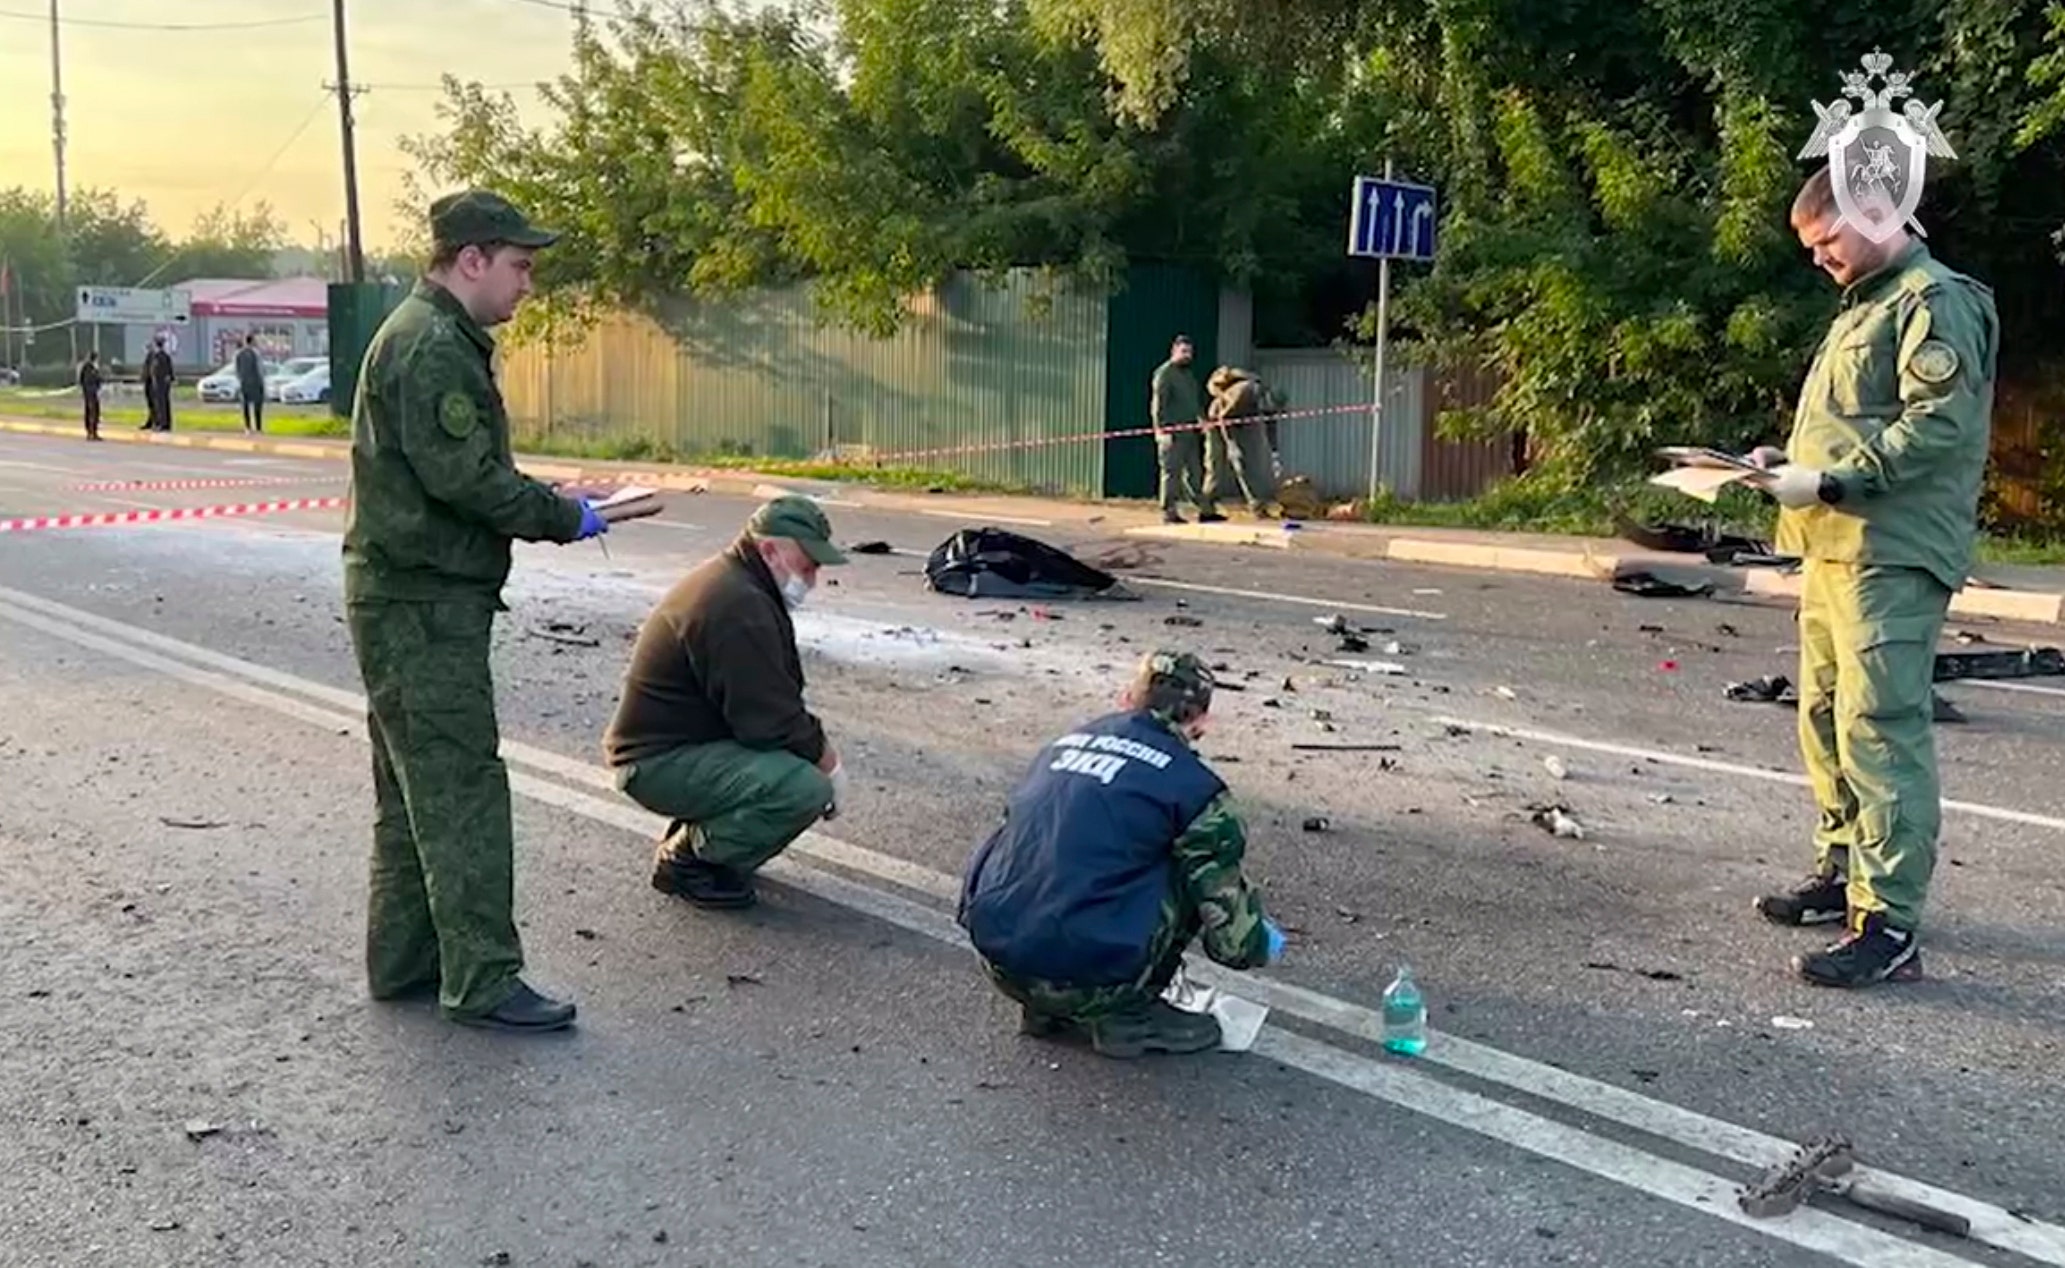 Daughter of top Putin ally Alexander Dugin, who pushed for Ukraine invasion, killed by car bomb outside Moscow